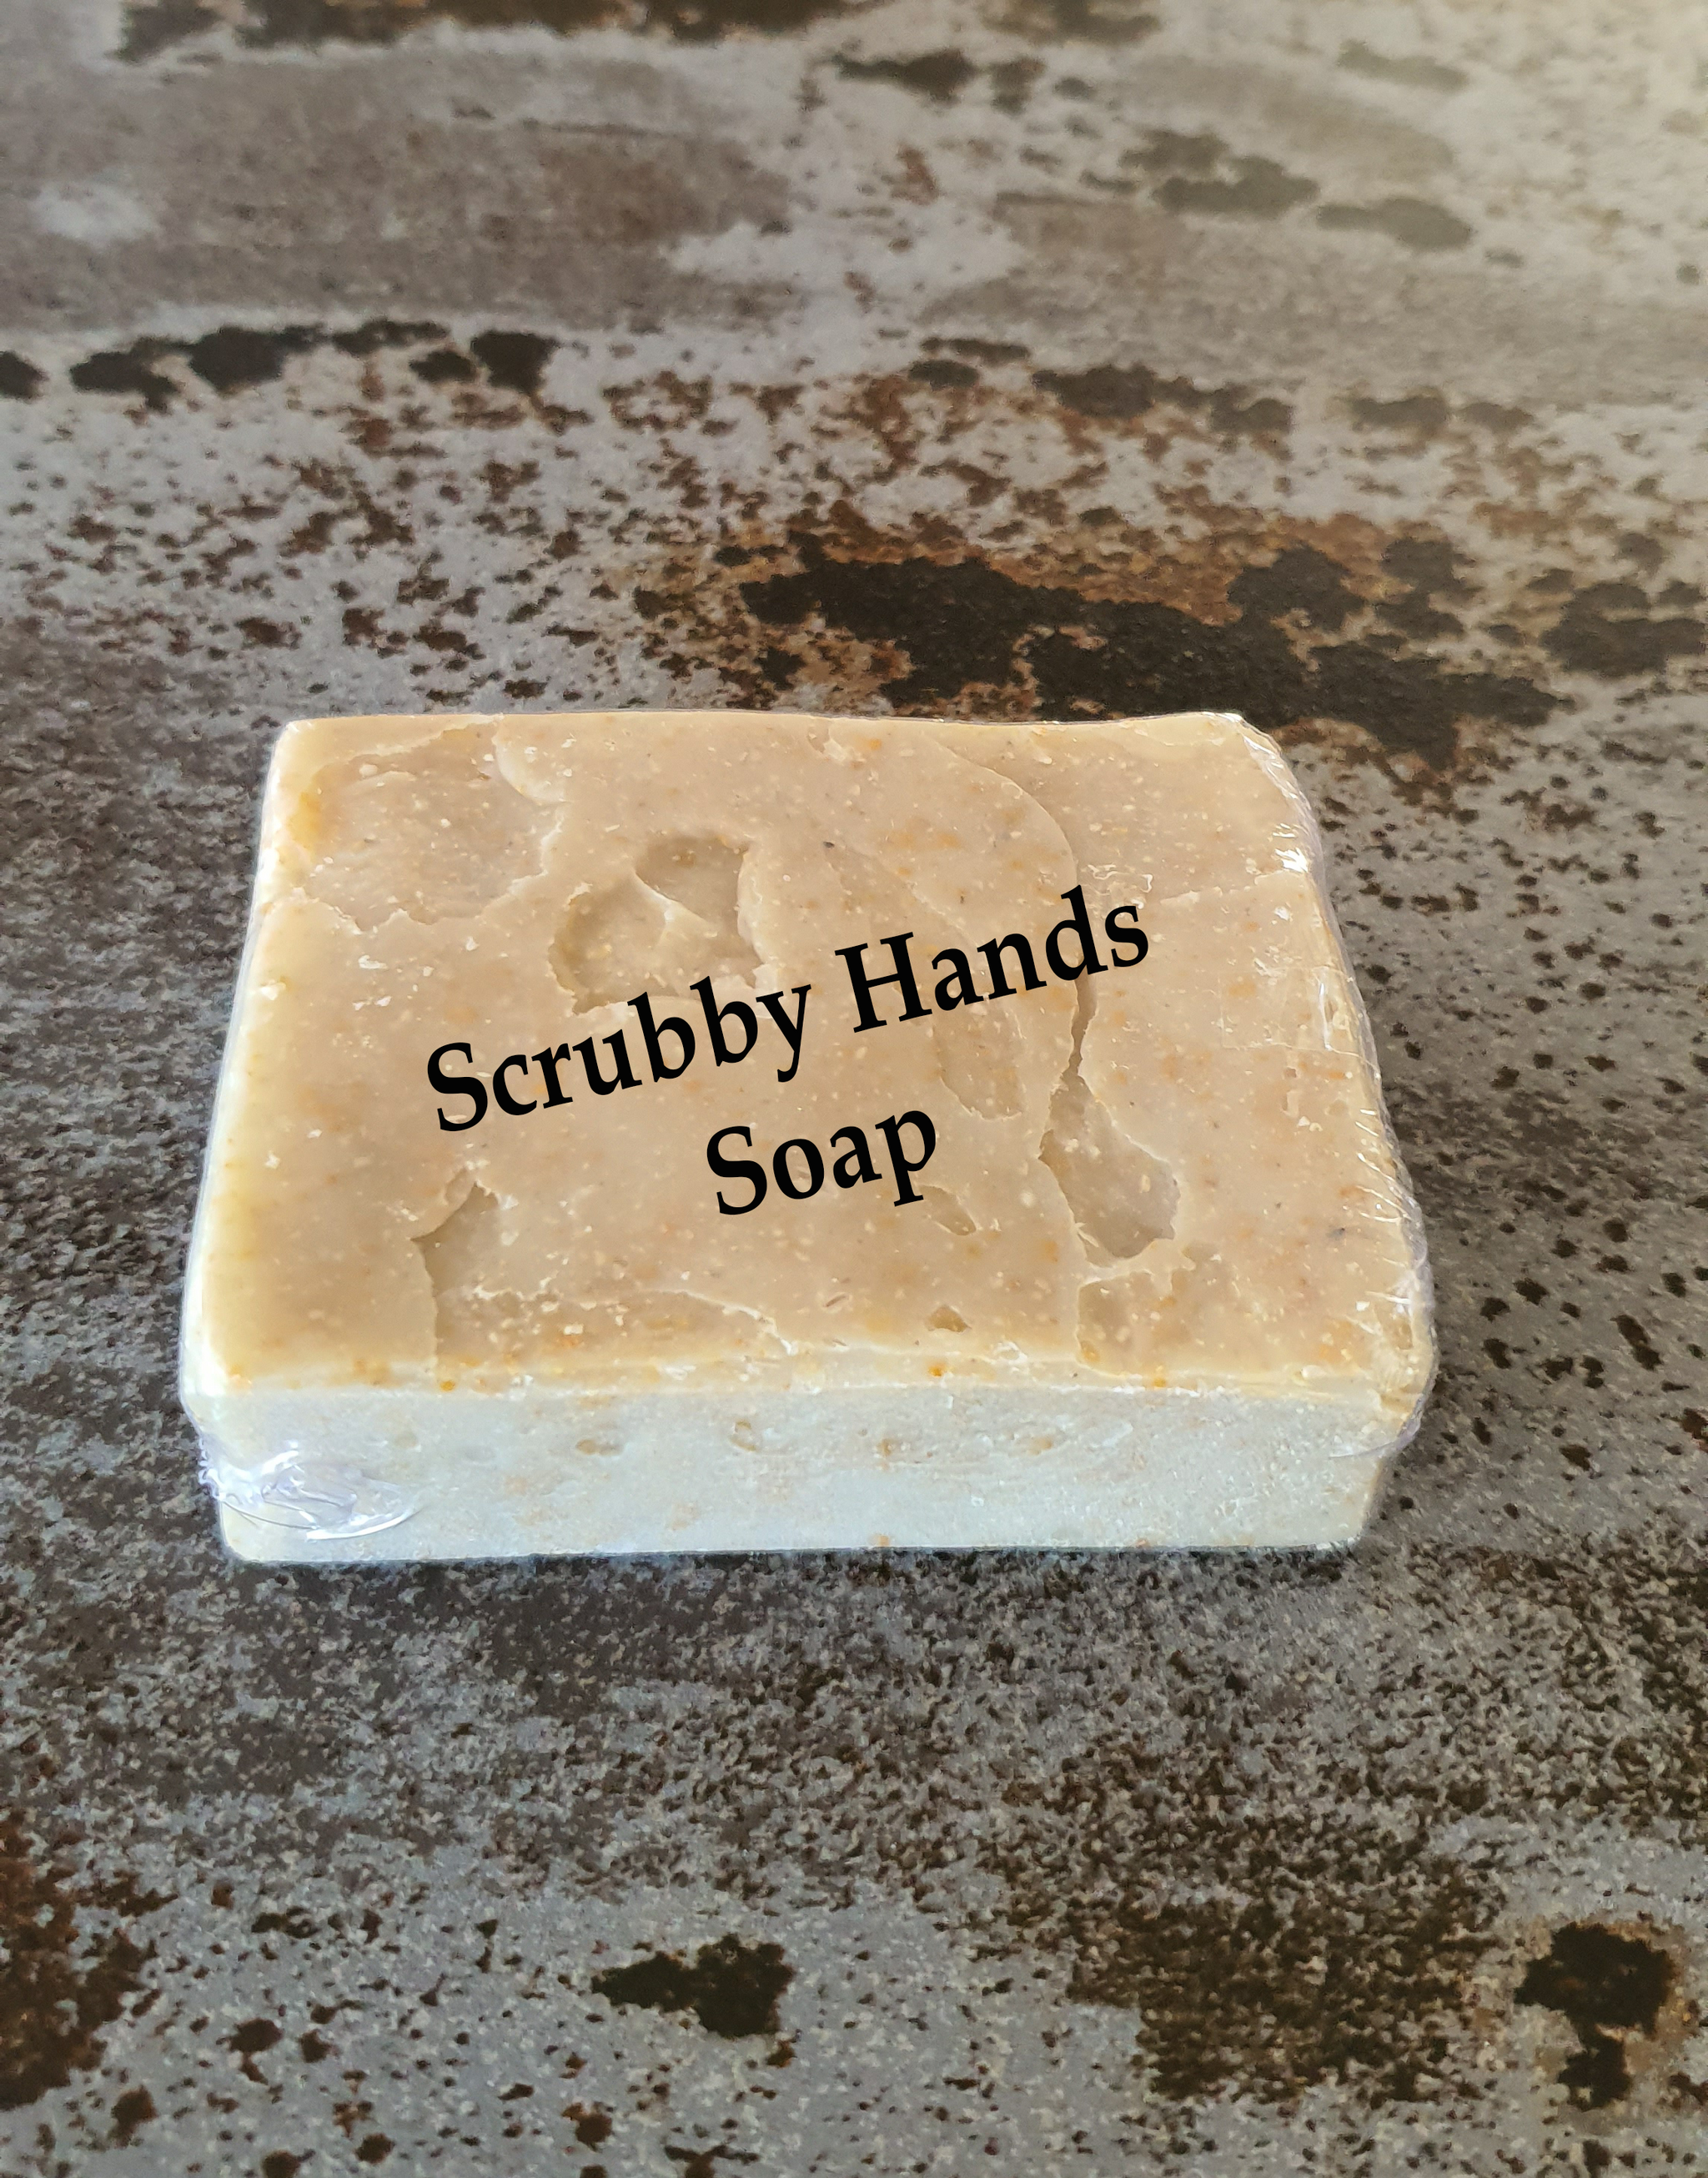 Scrubby Hands Soap